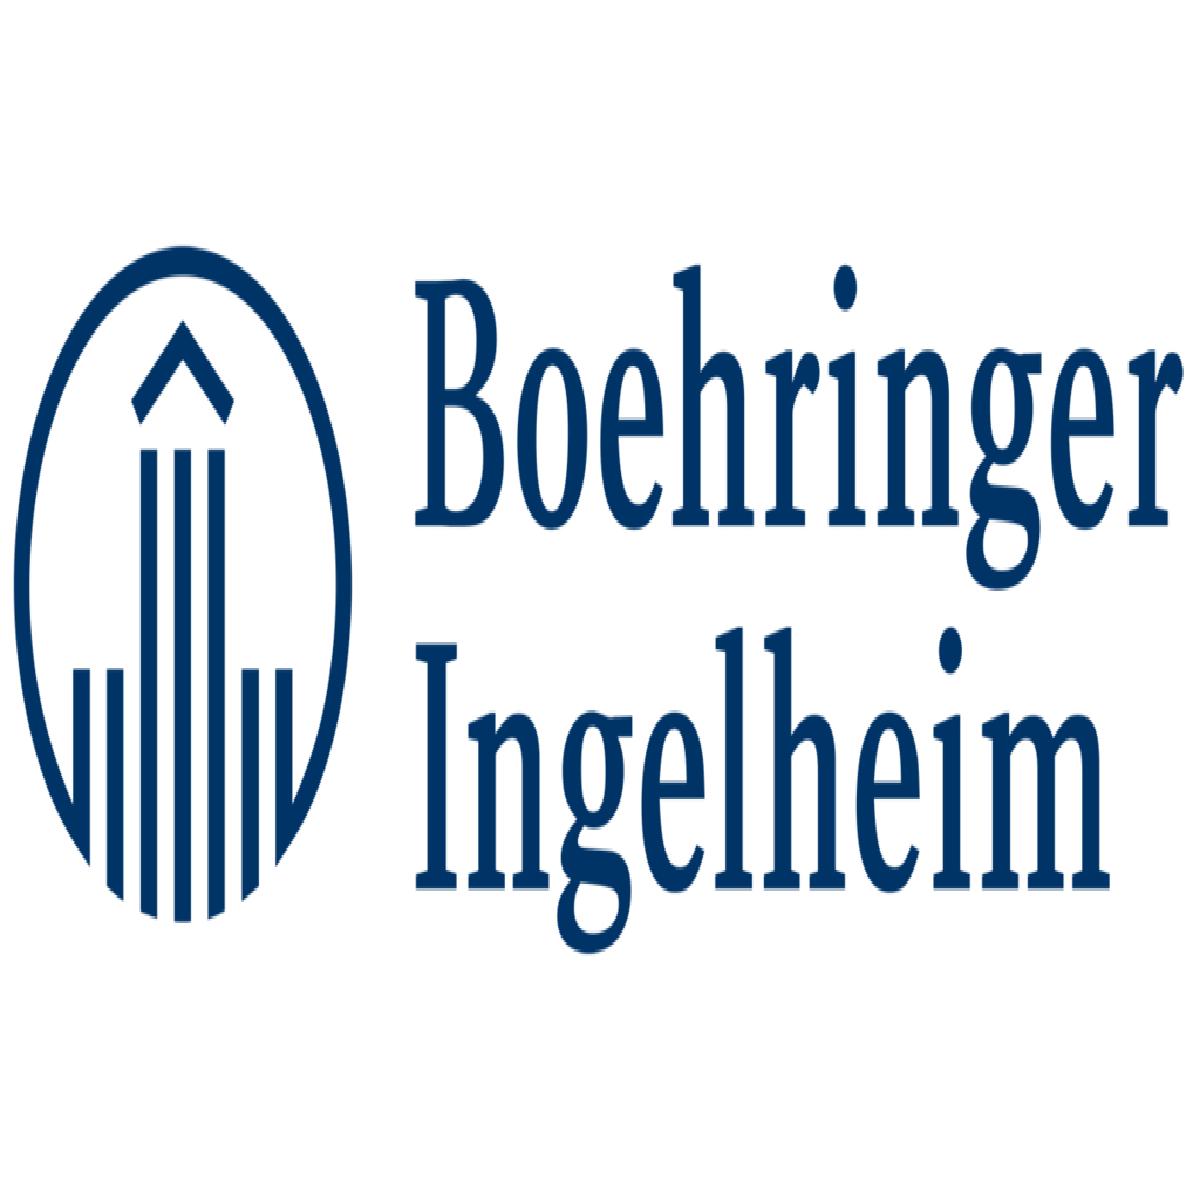 First half of 2022 Boehringer Ingelheim continues growth pace and strengthens research pipeline